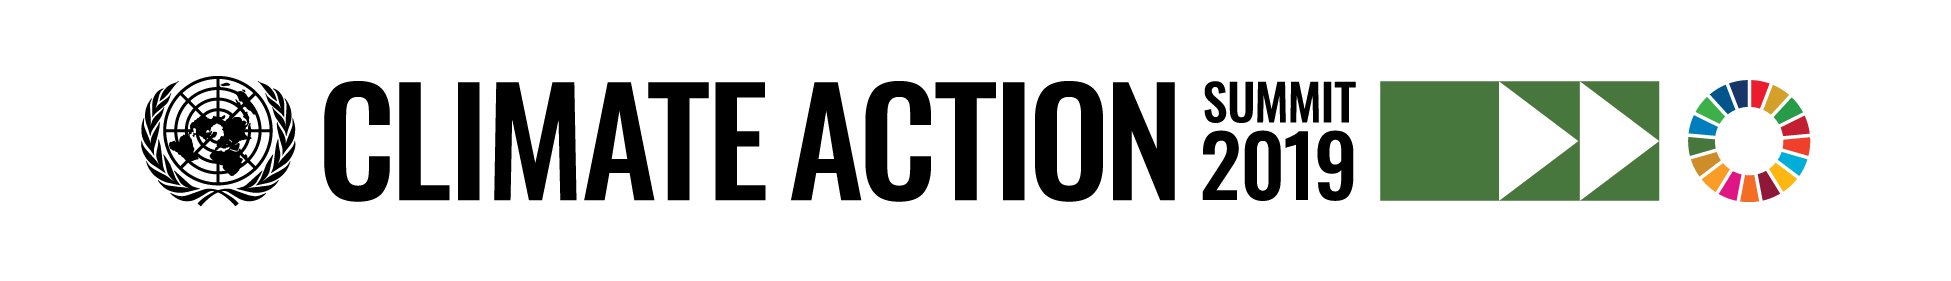 Climate Action Summit logo